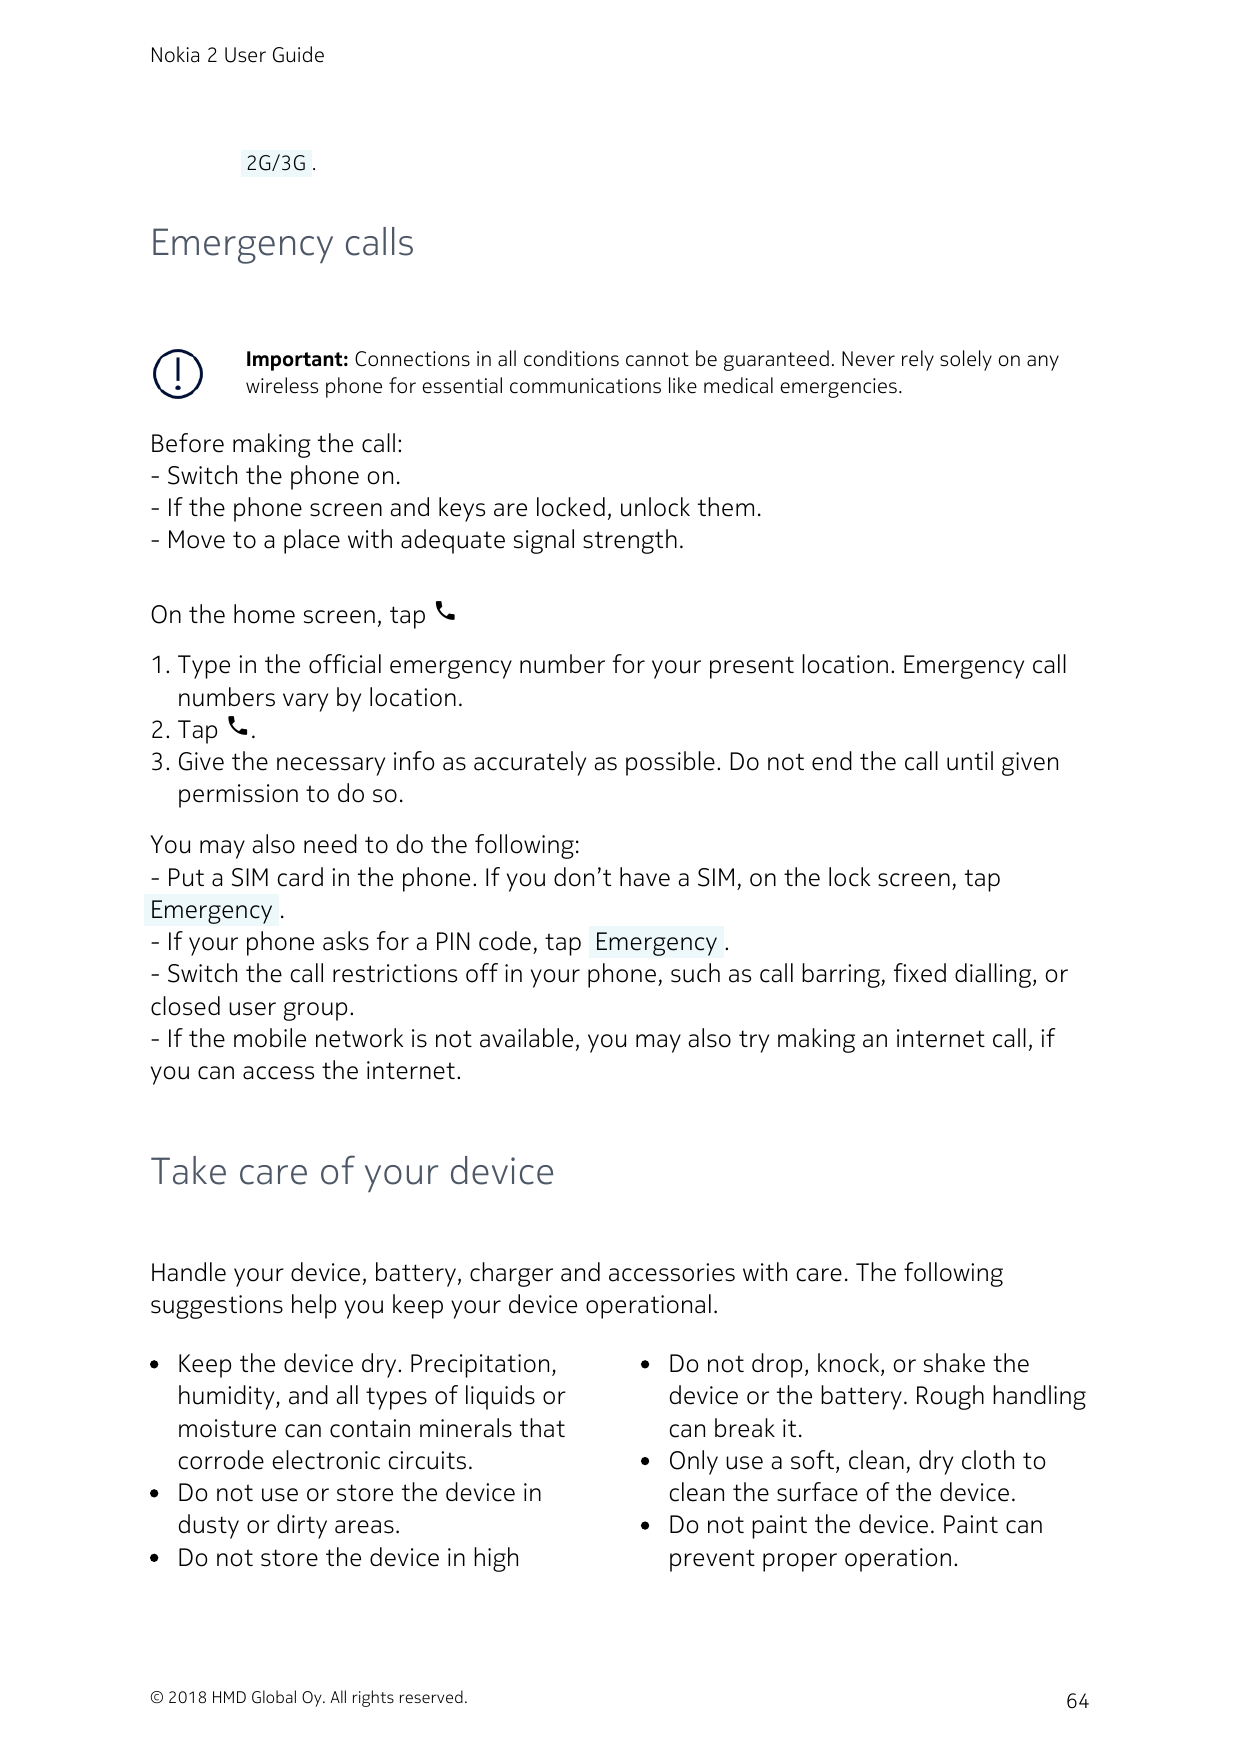 Nokia 2 User Guide 2G/3G .Emergency callsImportant: Connections in all conditions cannot be guaranteed. Never rely solely on any